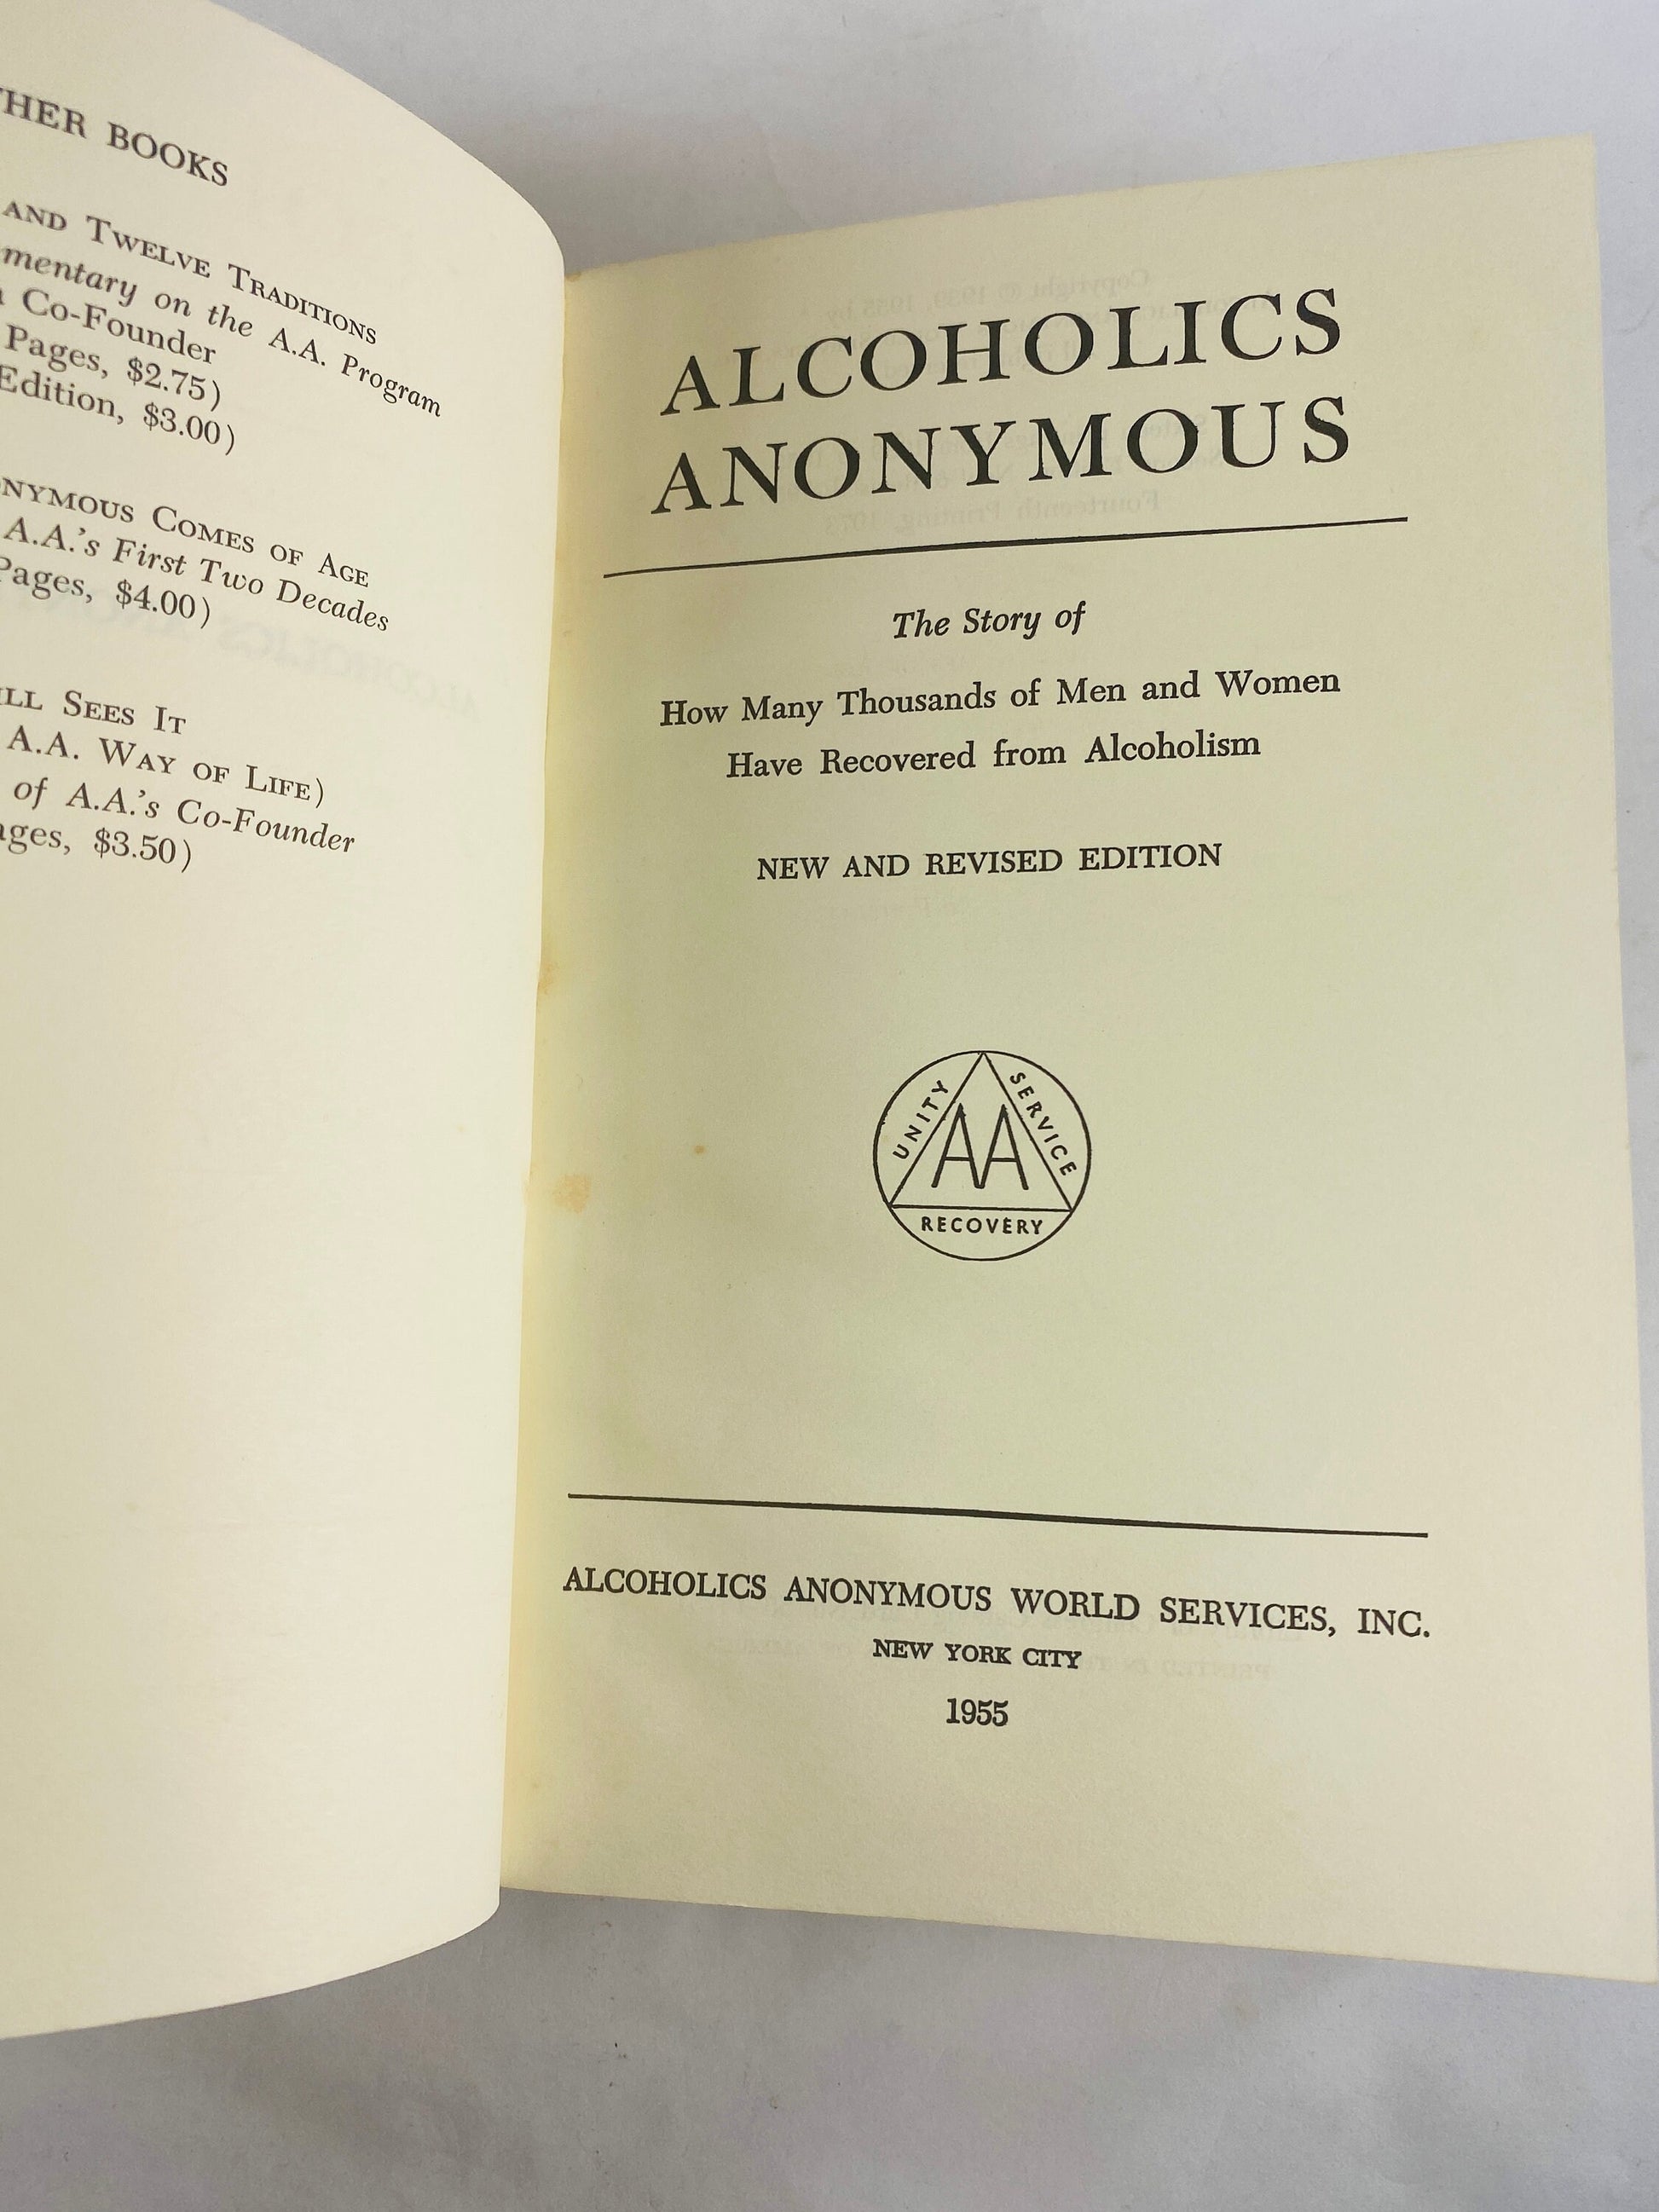 1973 Alcoholics Anonymous RARE Second Edition 14th printing vintage Big Book Recovery, Addiction, AA, Al-Anon, sobriety Collectible gift